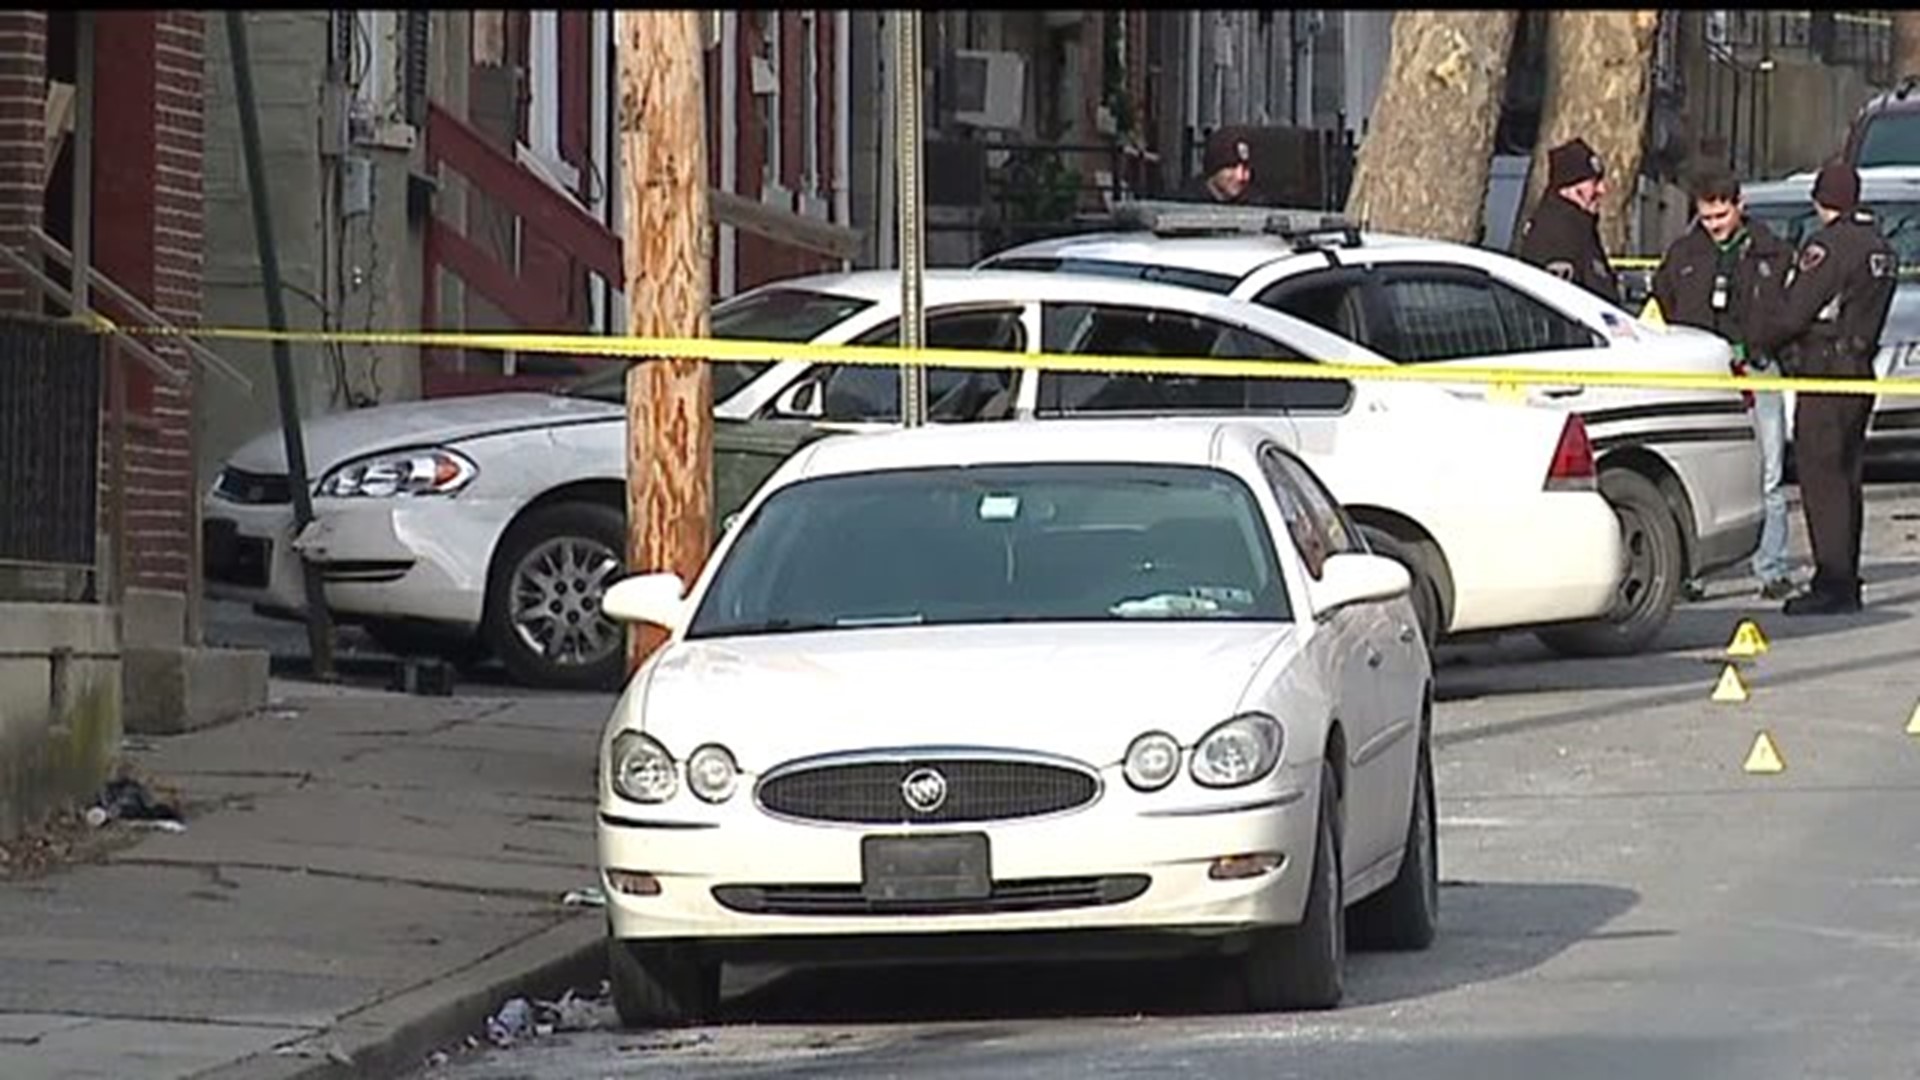 Police Chase Ends in Shooting